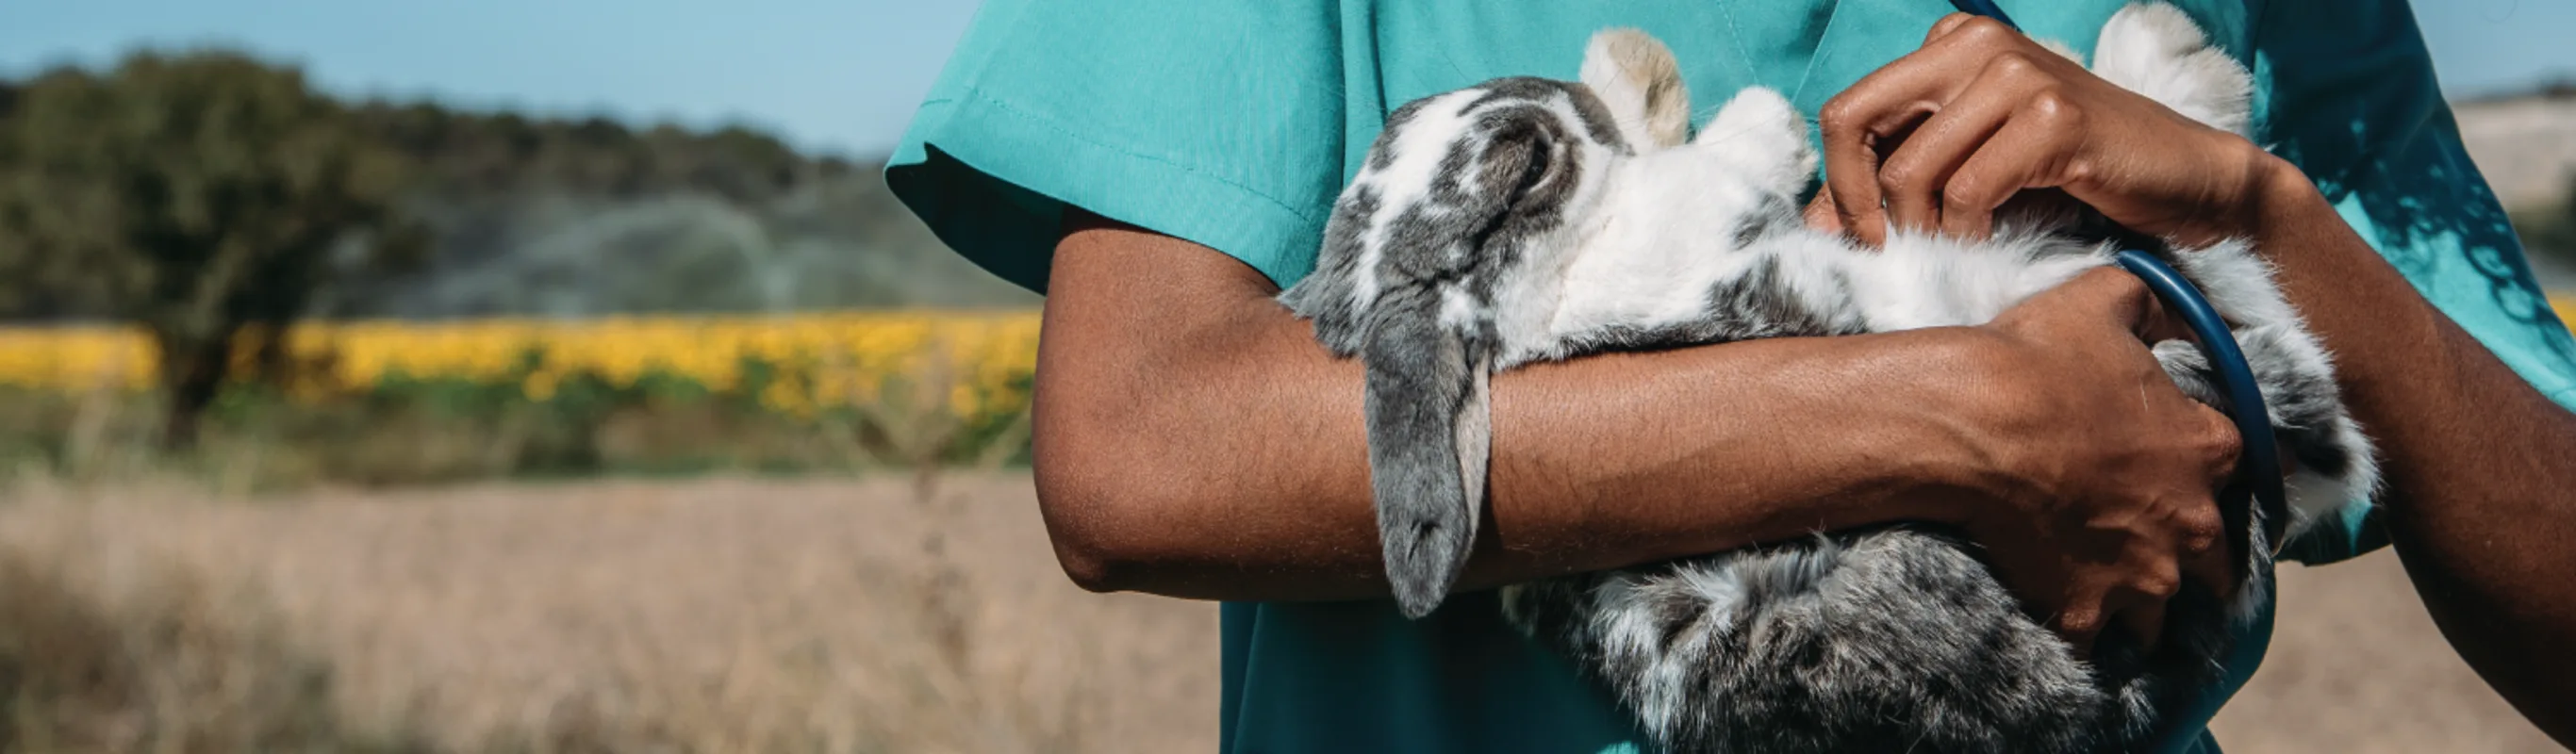 Woman holding rabbit while outside